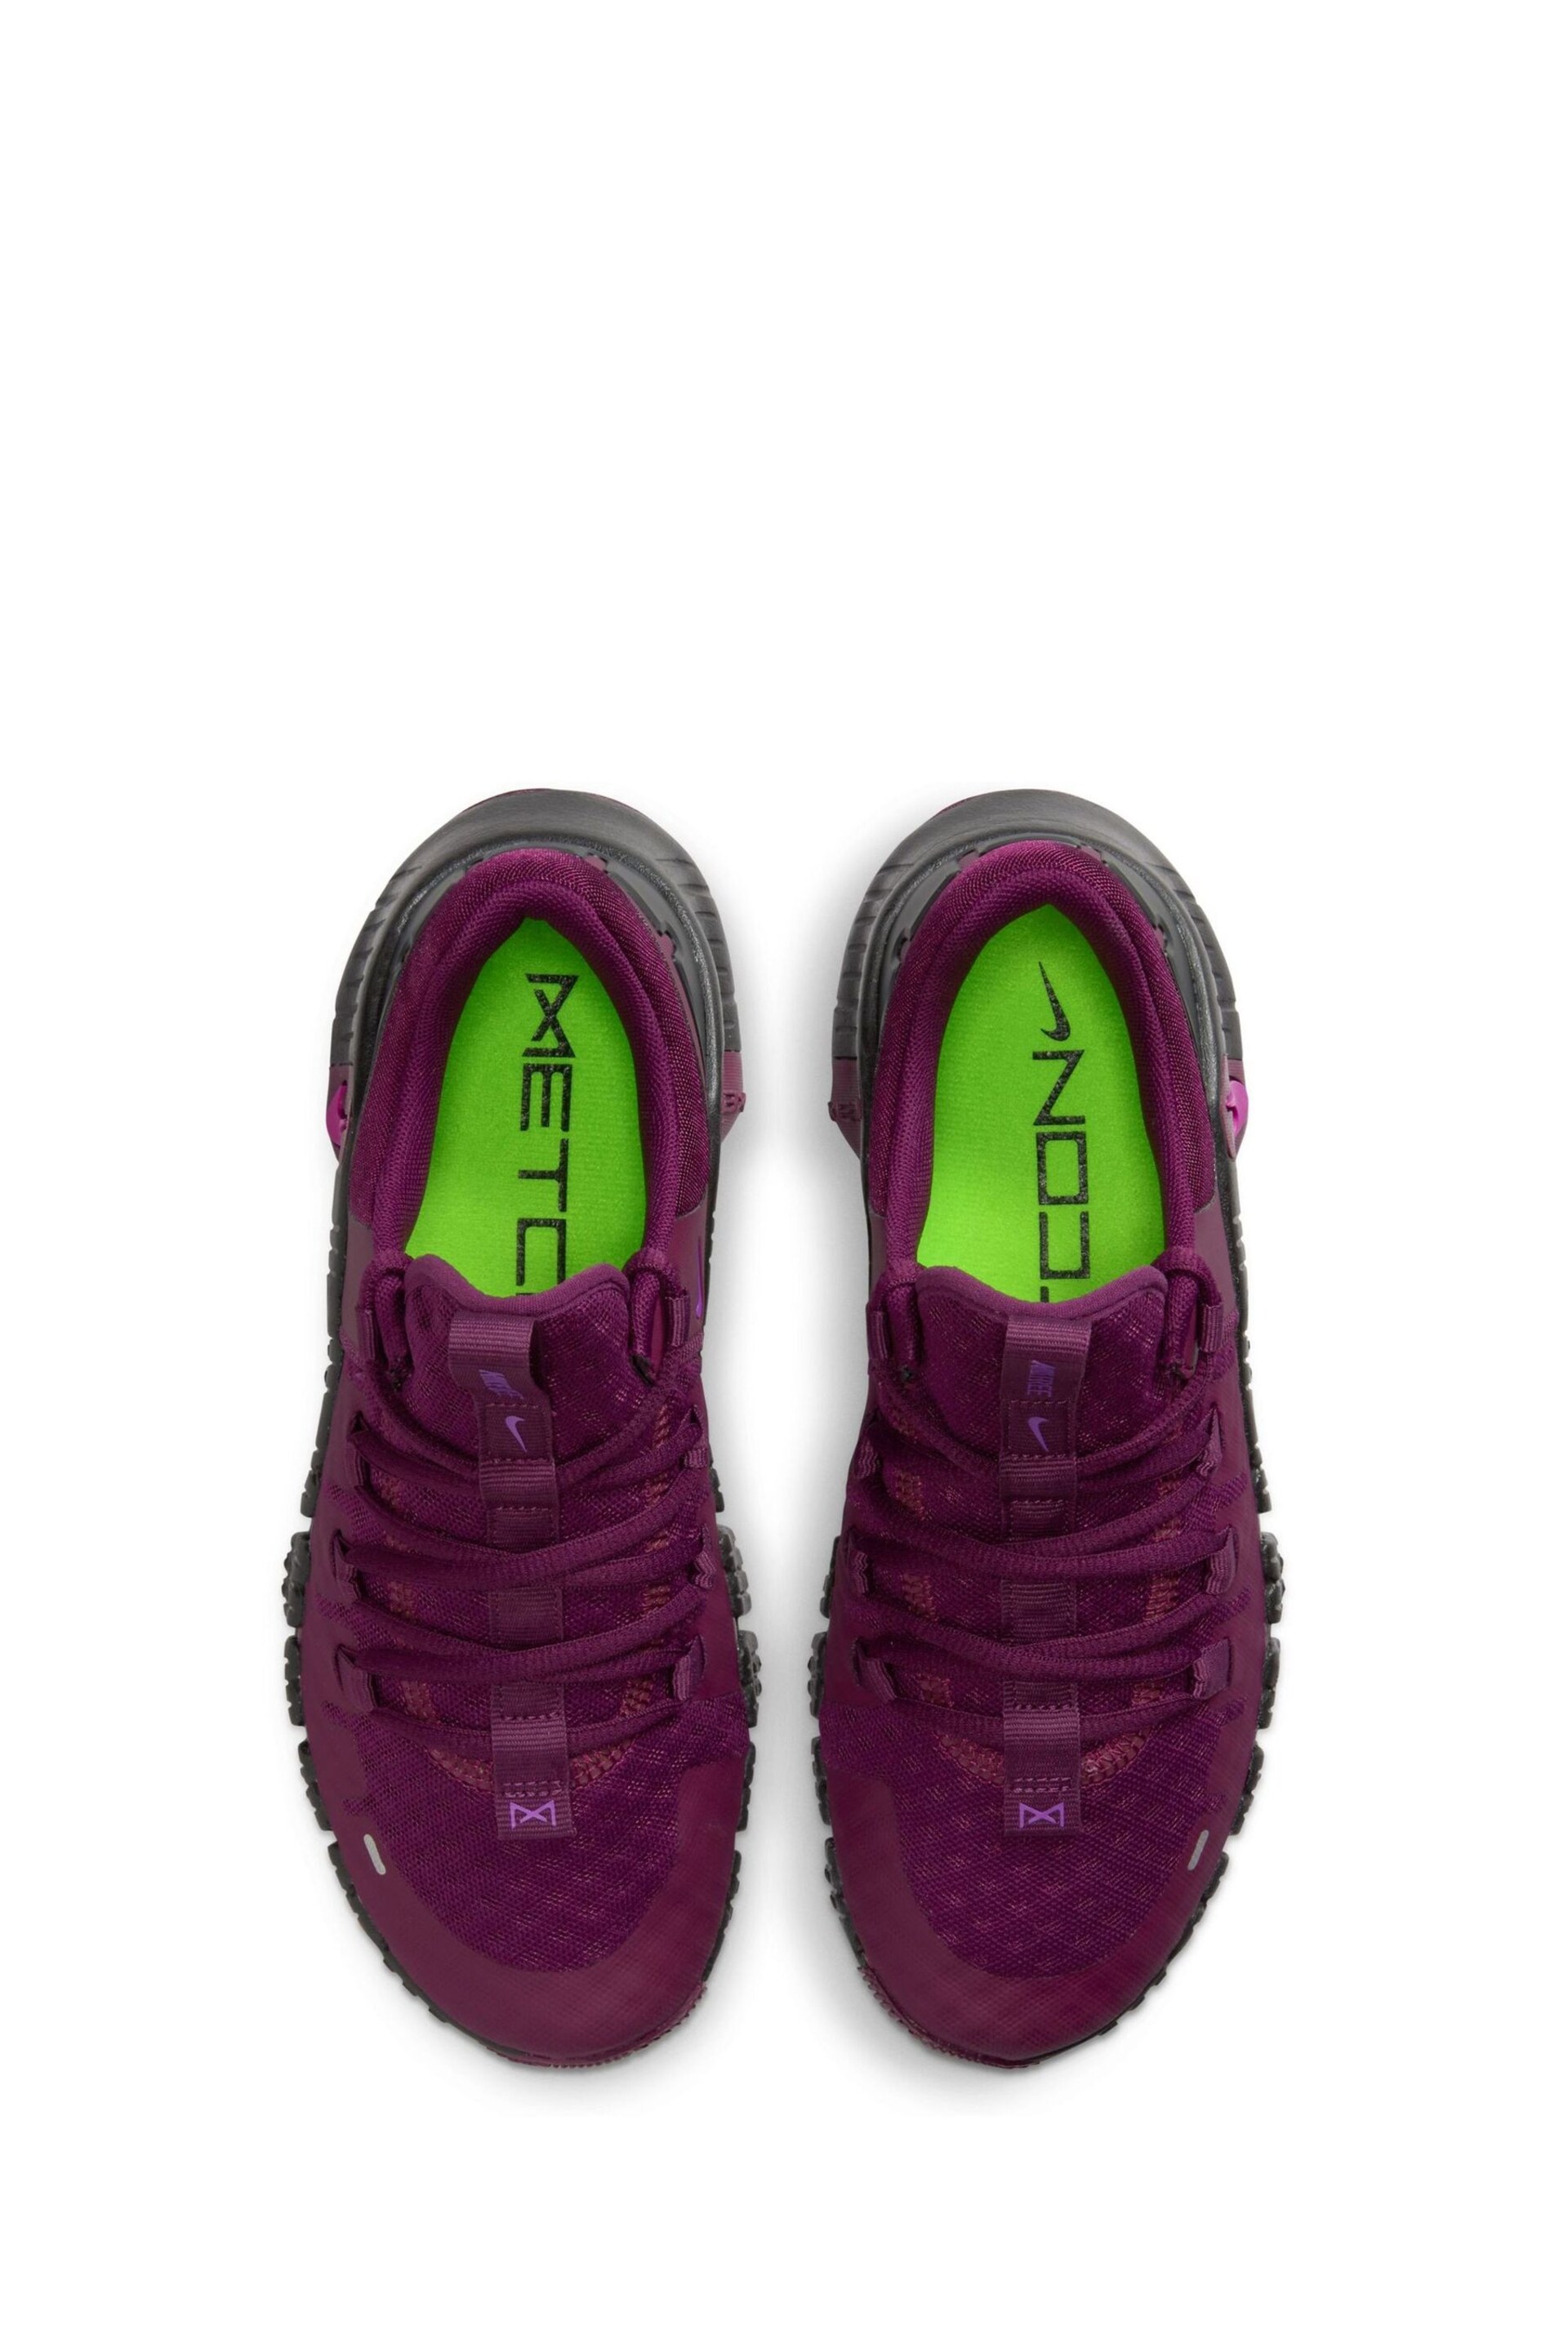 Nike Burgundy Red Free Metcon 5 Training Trainers - Image 5 of 10